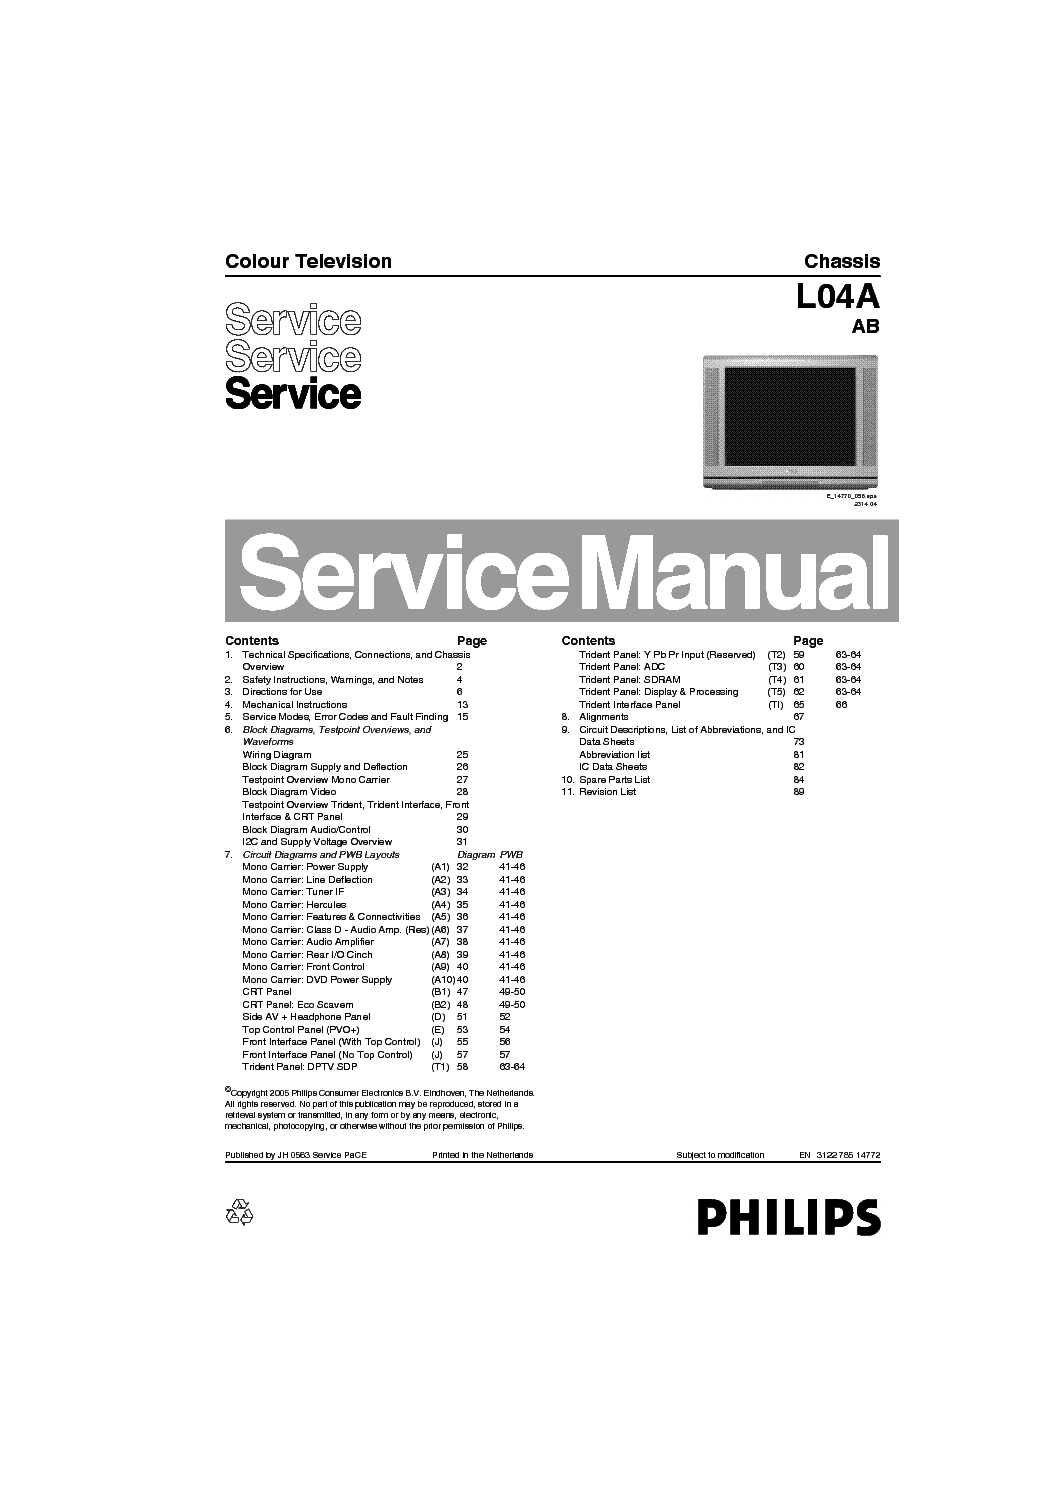 PHILIPS 29PT7325-69 CH L04A-AB service manual (1st page)